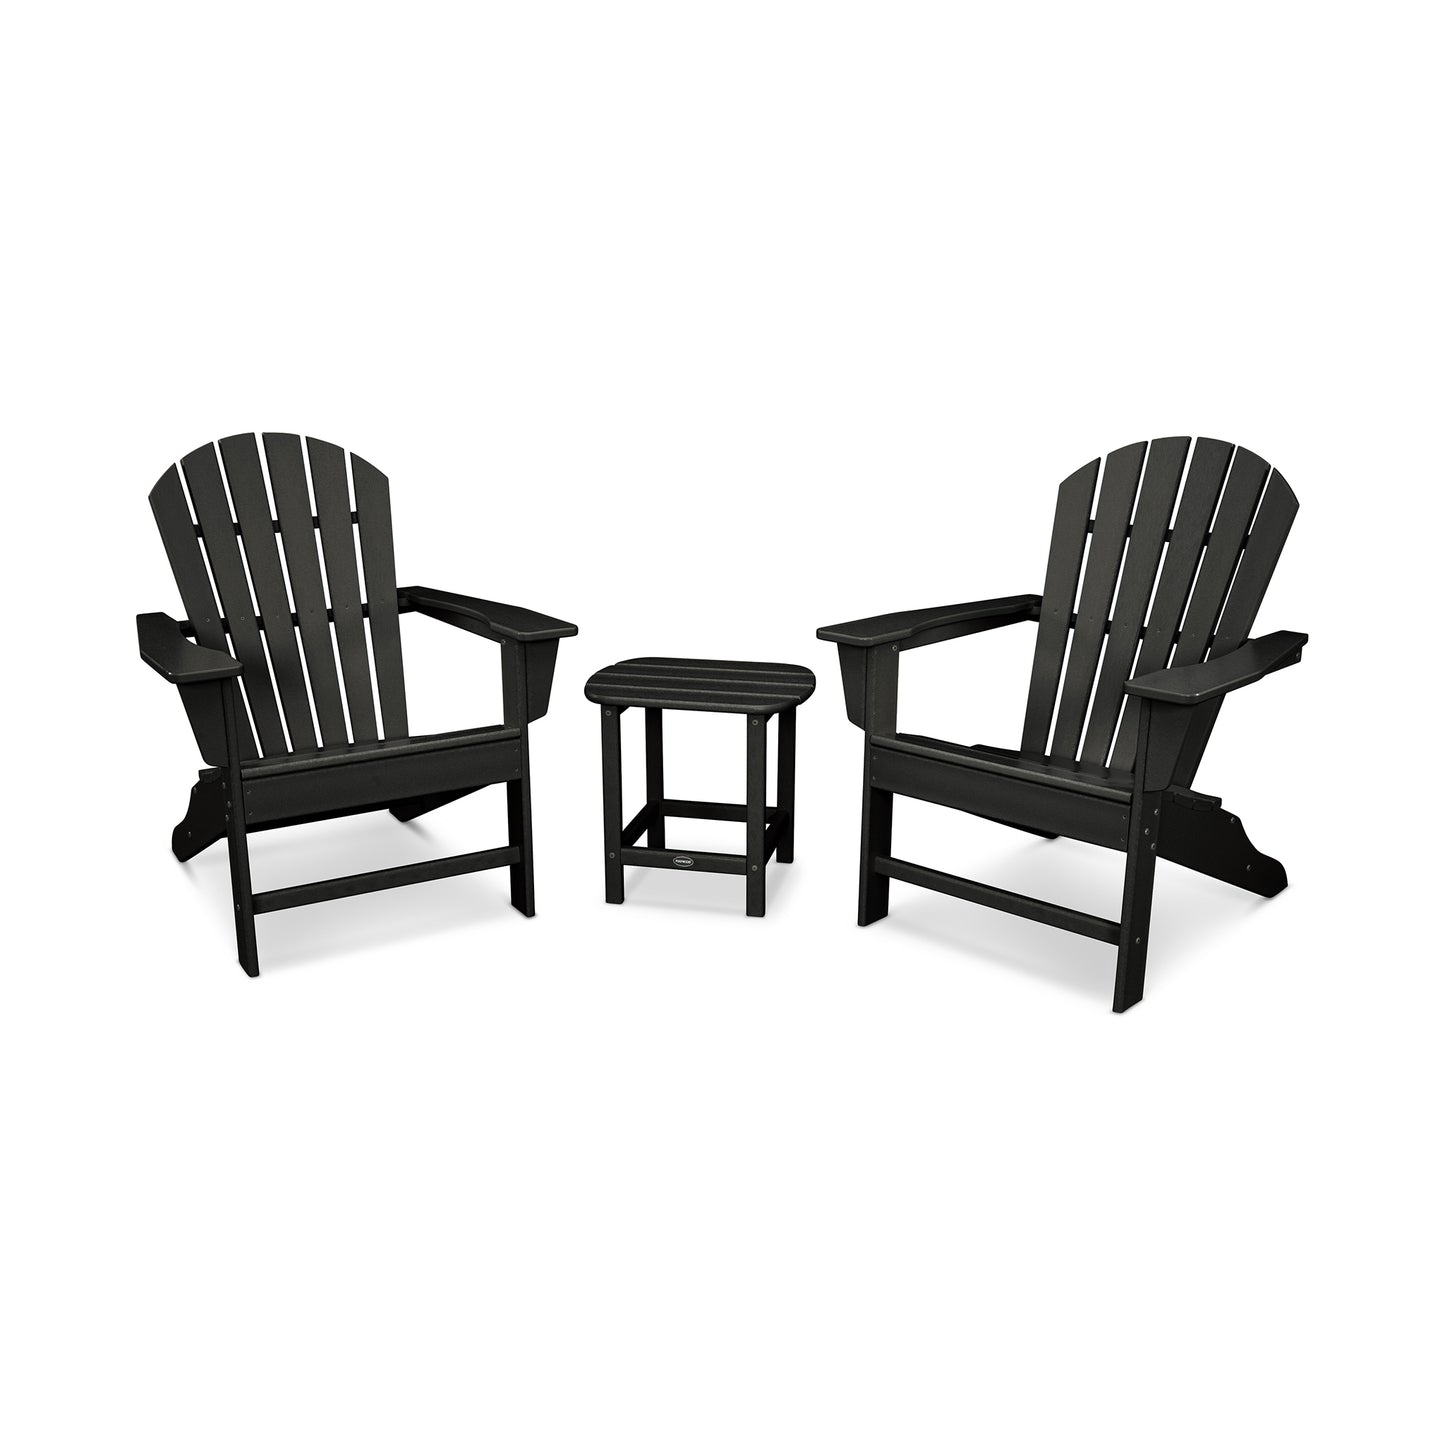 Two black POLYWOOD South Beach Adirondack chairs with a matching small round table, set on a plain white background.